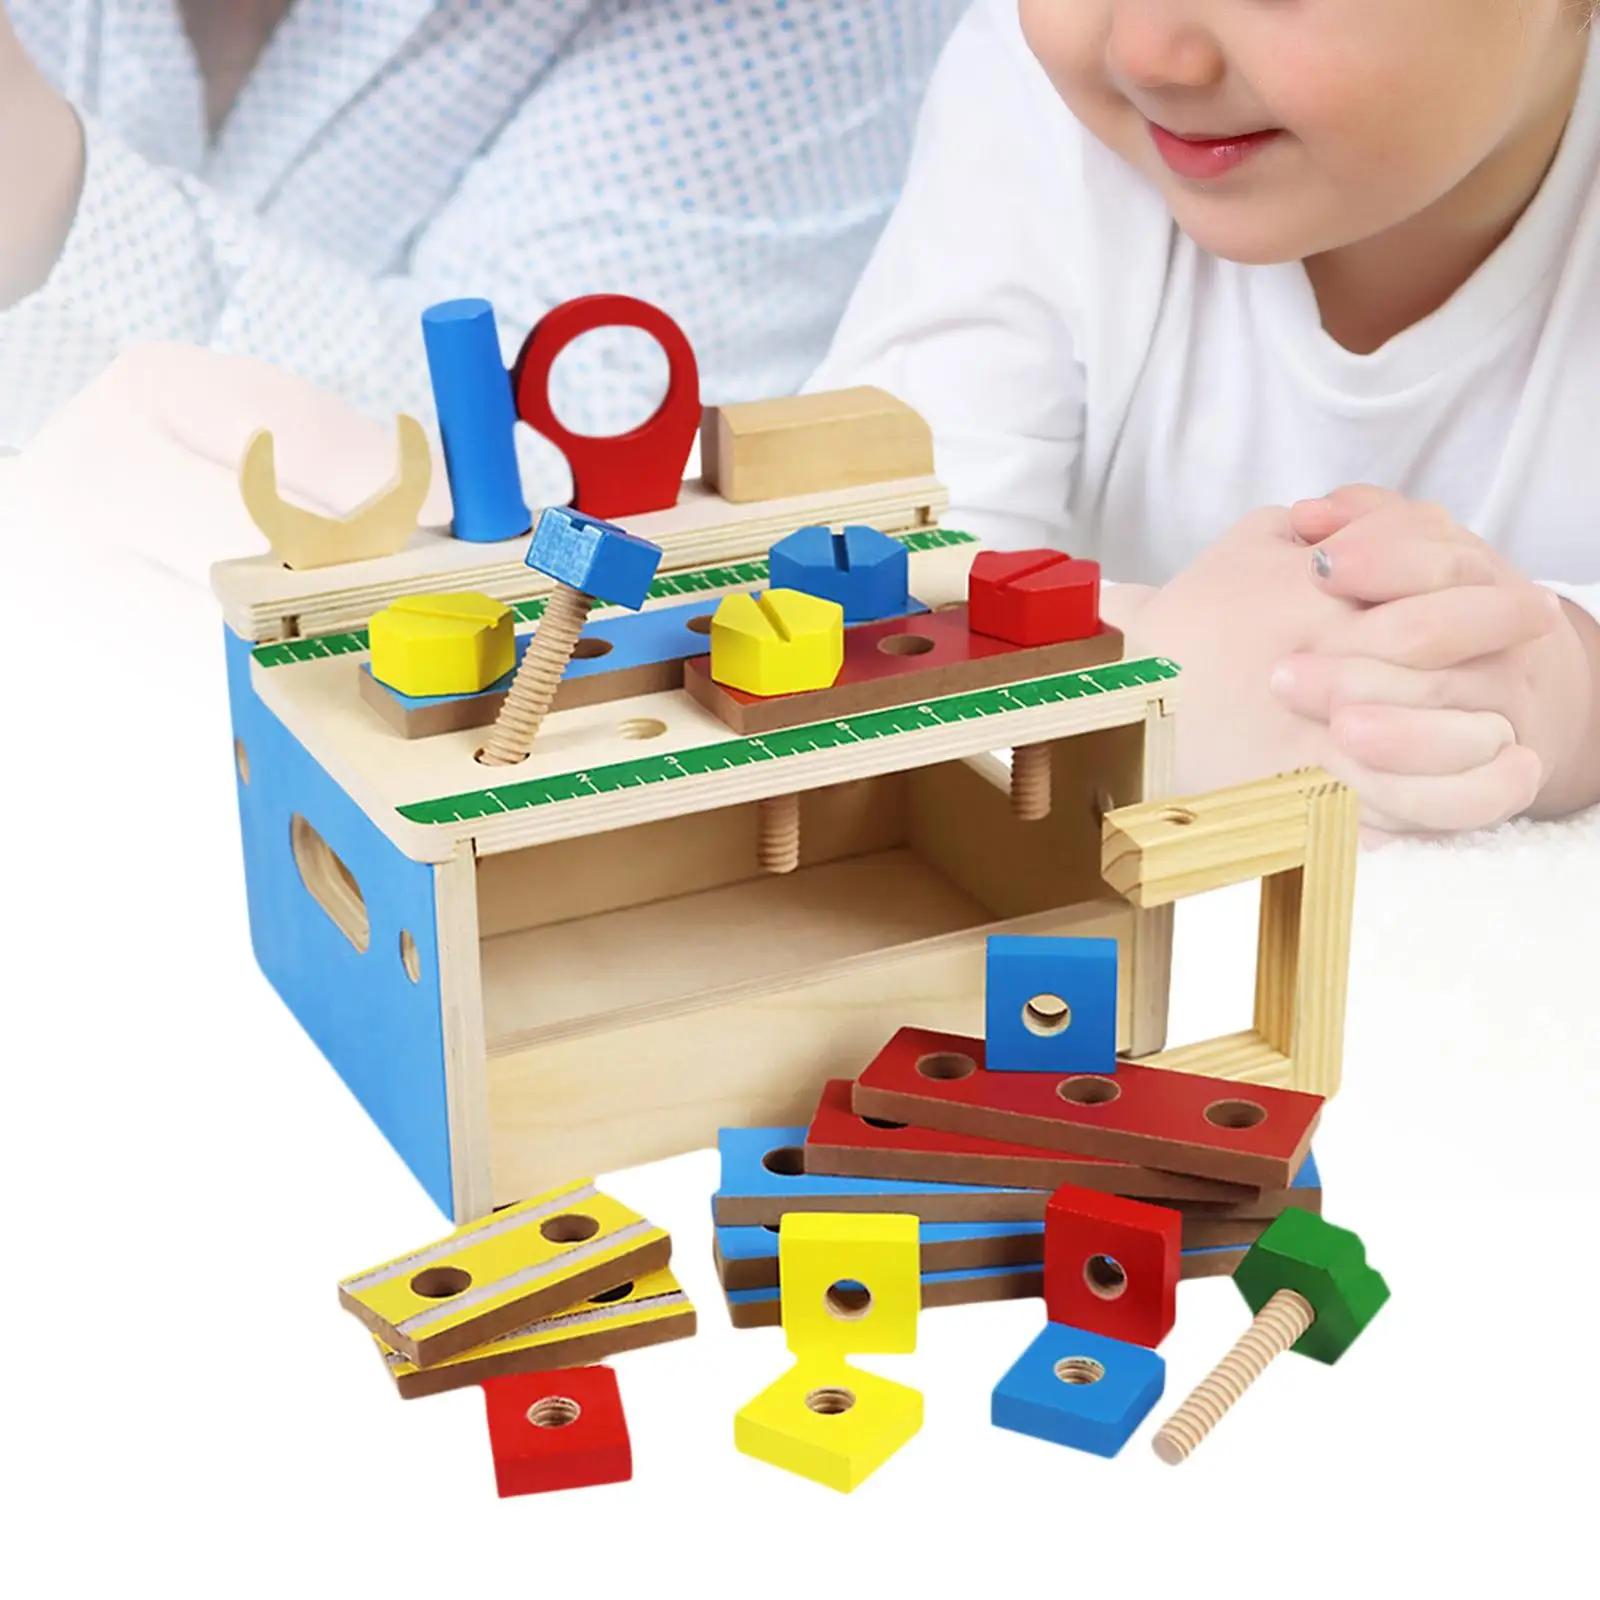 Tool Kit Learning Educational Toy Wooden Construction Toy for Kids